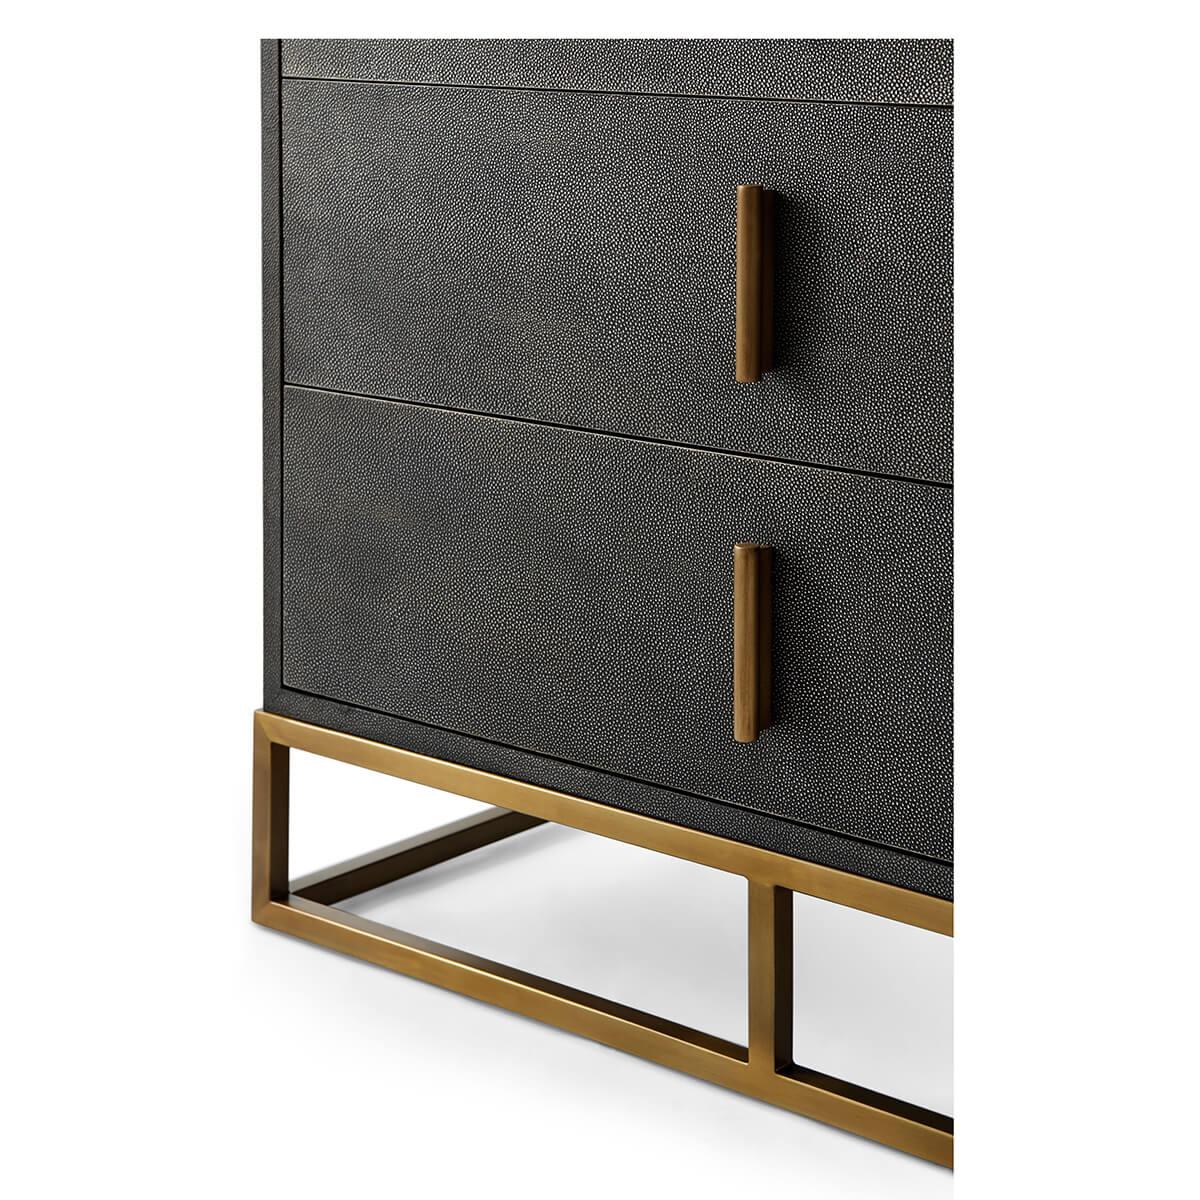 Wrapped in a shagreen embossed leather in our dark tempest smoke finish, with six long drawers and with brushed brass finish hardware and trim, all raised on a cube form brushed brass base.

Dimensions: 35.75